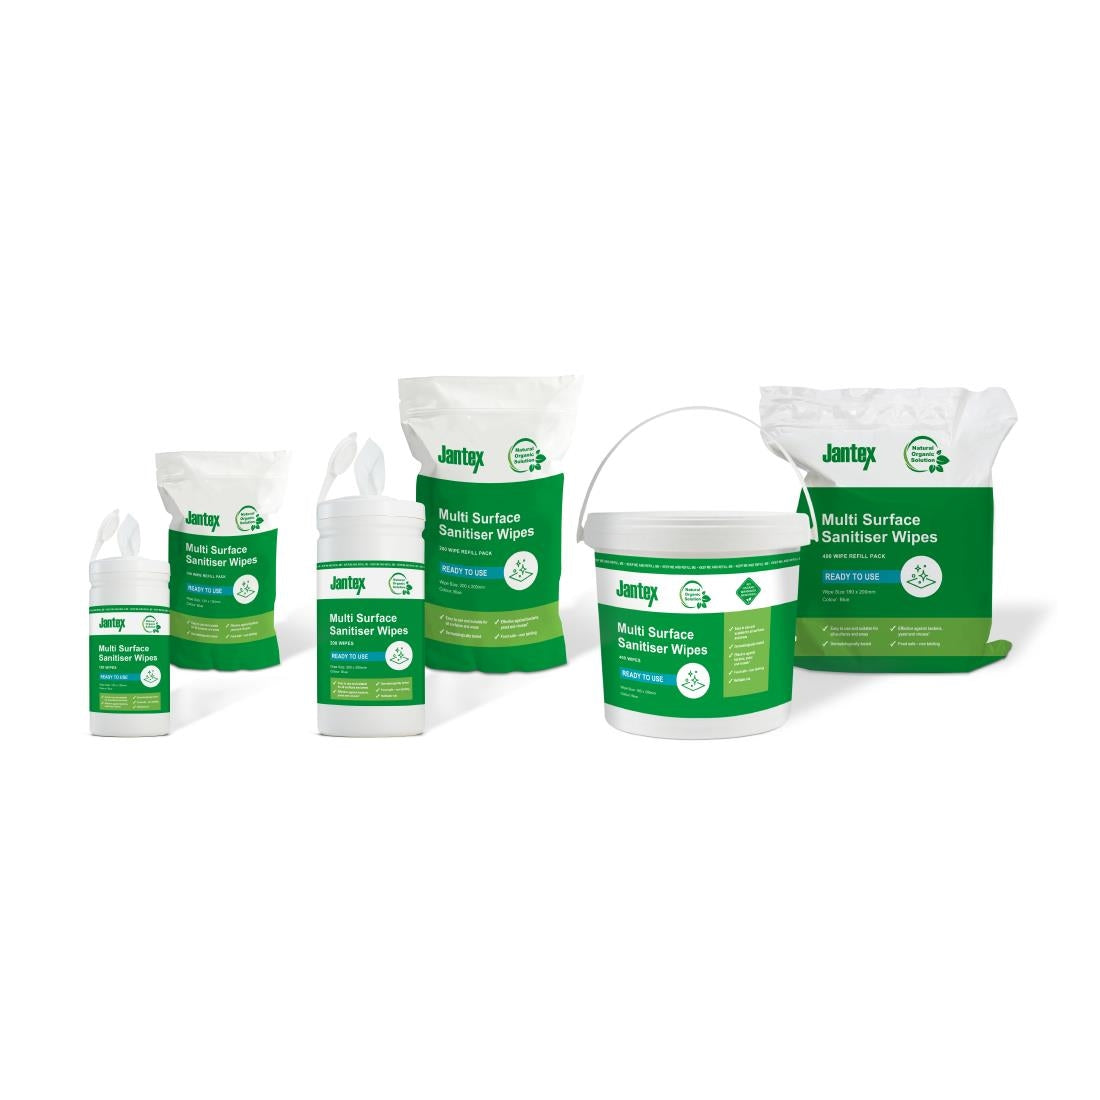 CH650 Jantex Green Surface Sanitiser Wipes Starter Tub 200mm (Pack of 200) JD Catering Equipment Solutions Ltd